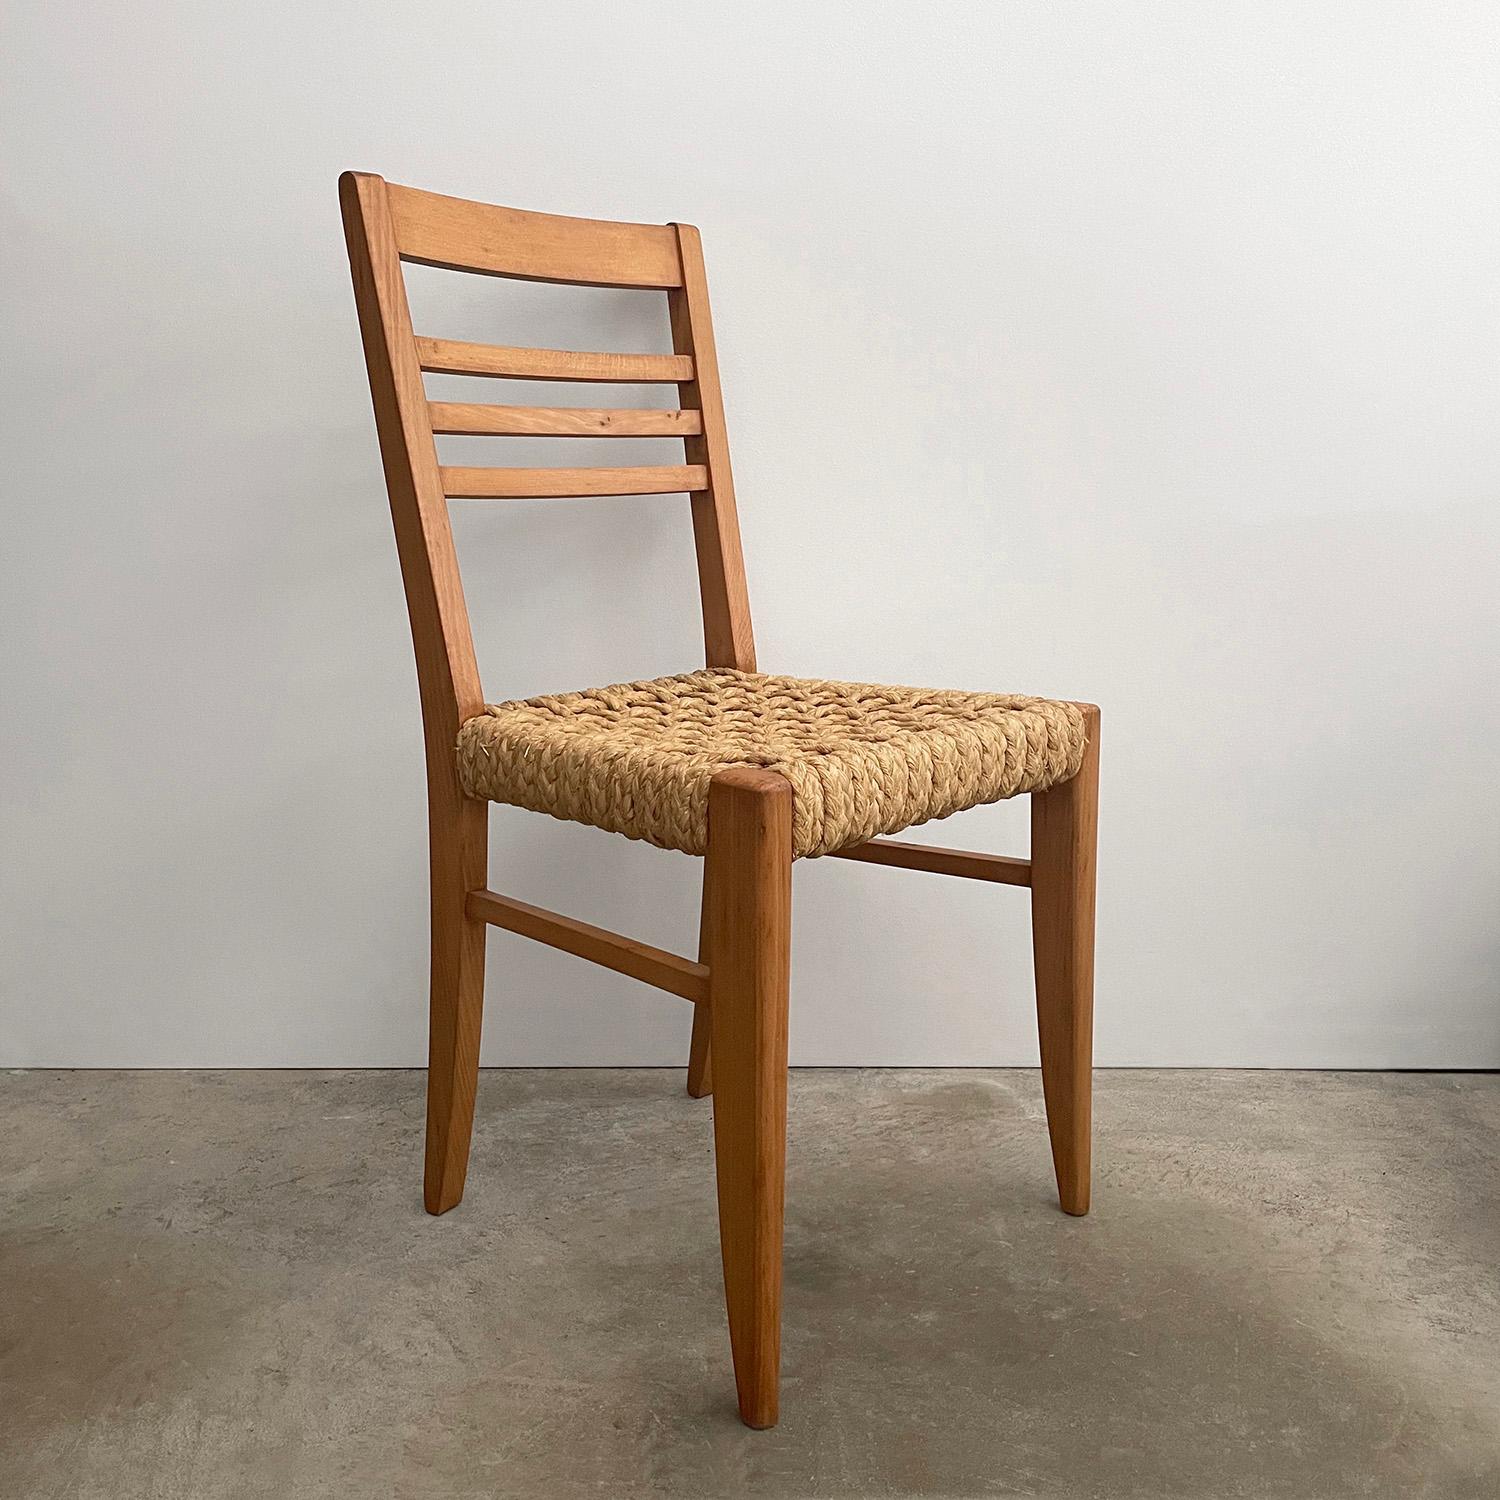 Audoux-Minet French Oak & Rope Side Chair
Designed by Adrien Audoux & Frida Minet
France, circa 1950s
This handsome side chair will add wonderful texture and rich history to any room 
Solid wood frame with braided rope seat
Seat shows minor wear